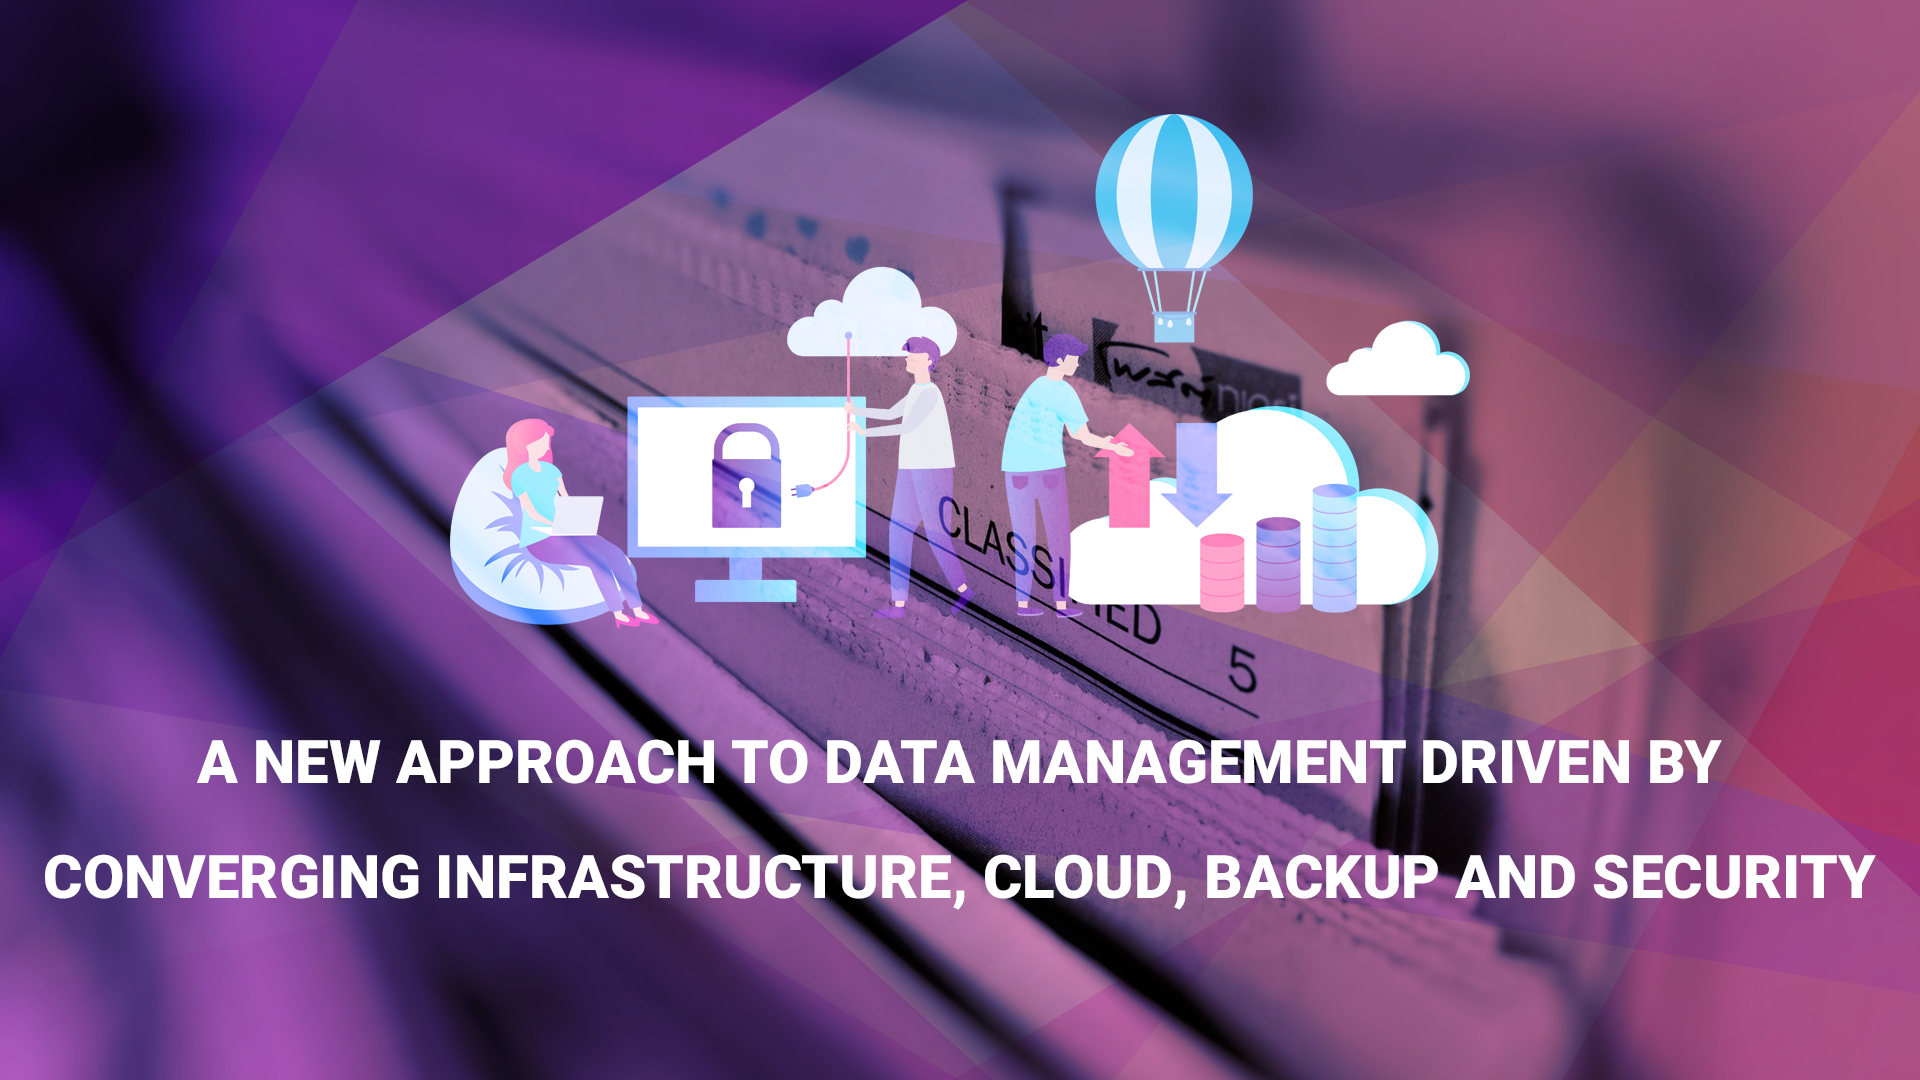 A New Approach to Data Management Driven by Converging Infrastructure, Cloud, Backup and Security